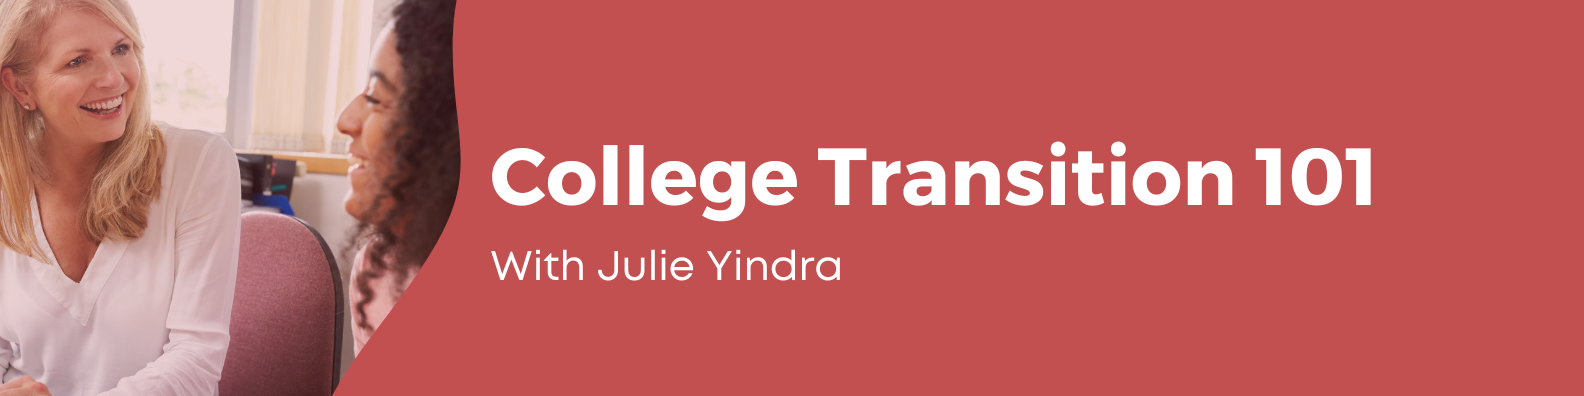 College Transition 101 with Julie Yindra